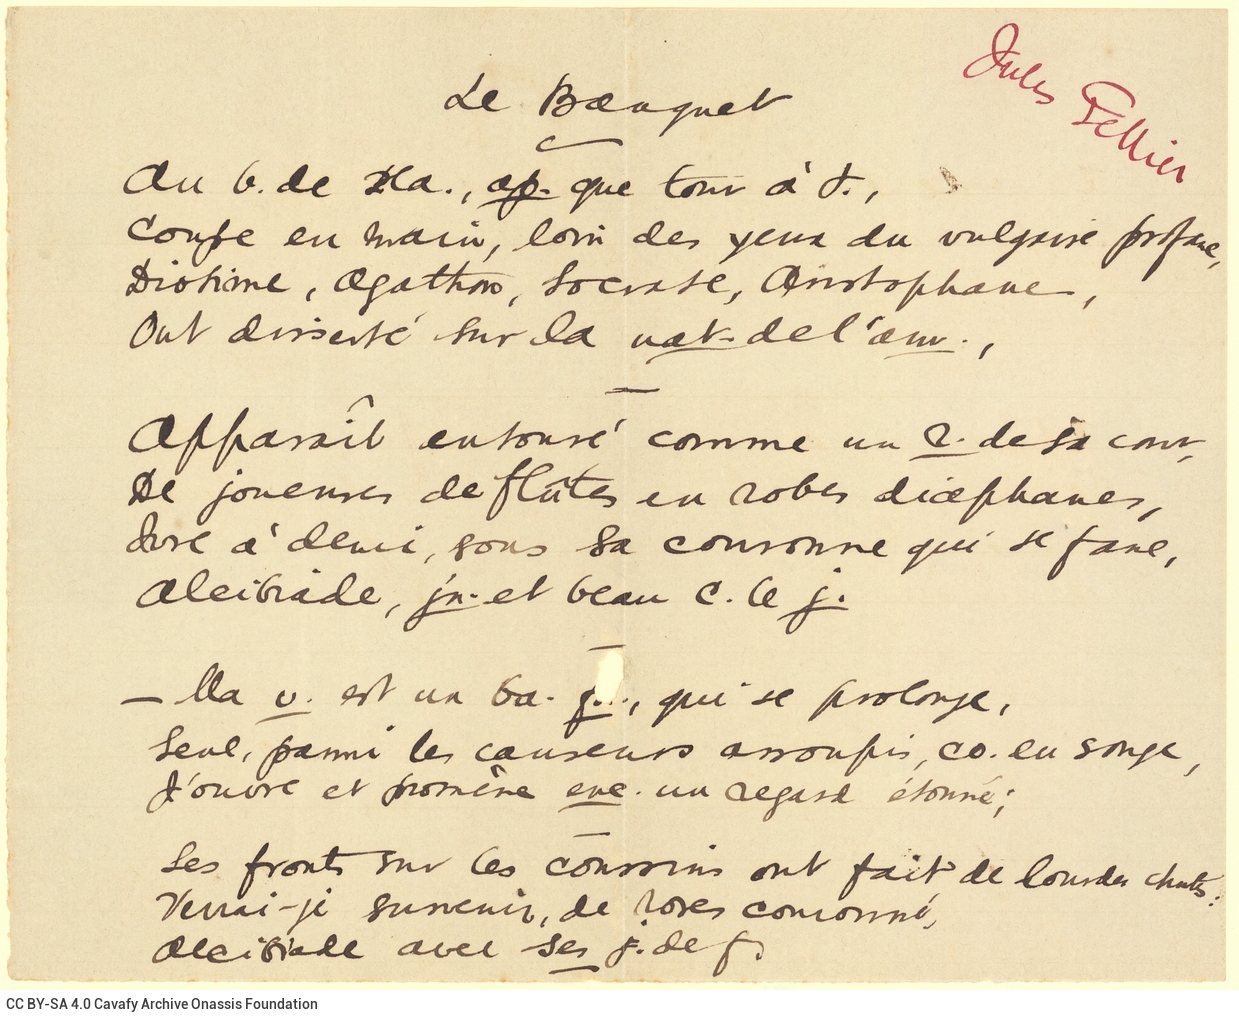 Handwritten copy of a poem by Jules Tellier on one side of a cut sheet. Abbreviations. The name of the poet ("Jules Tellie